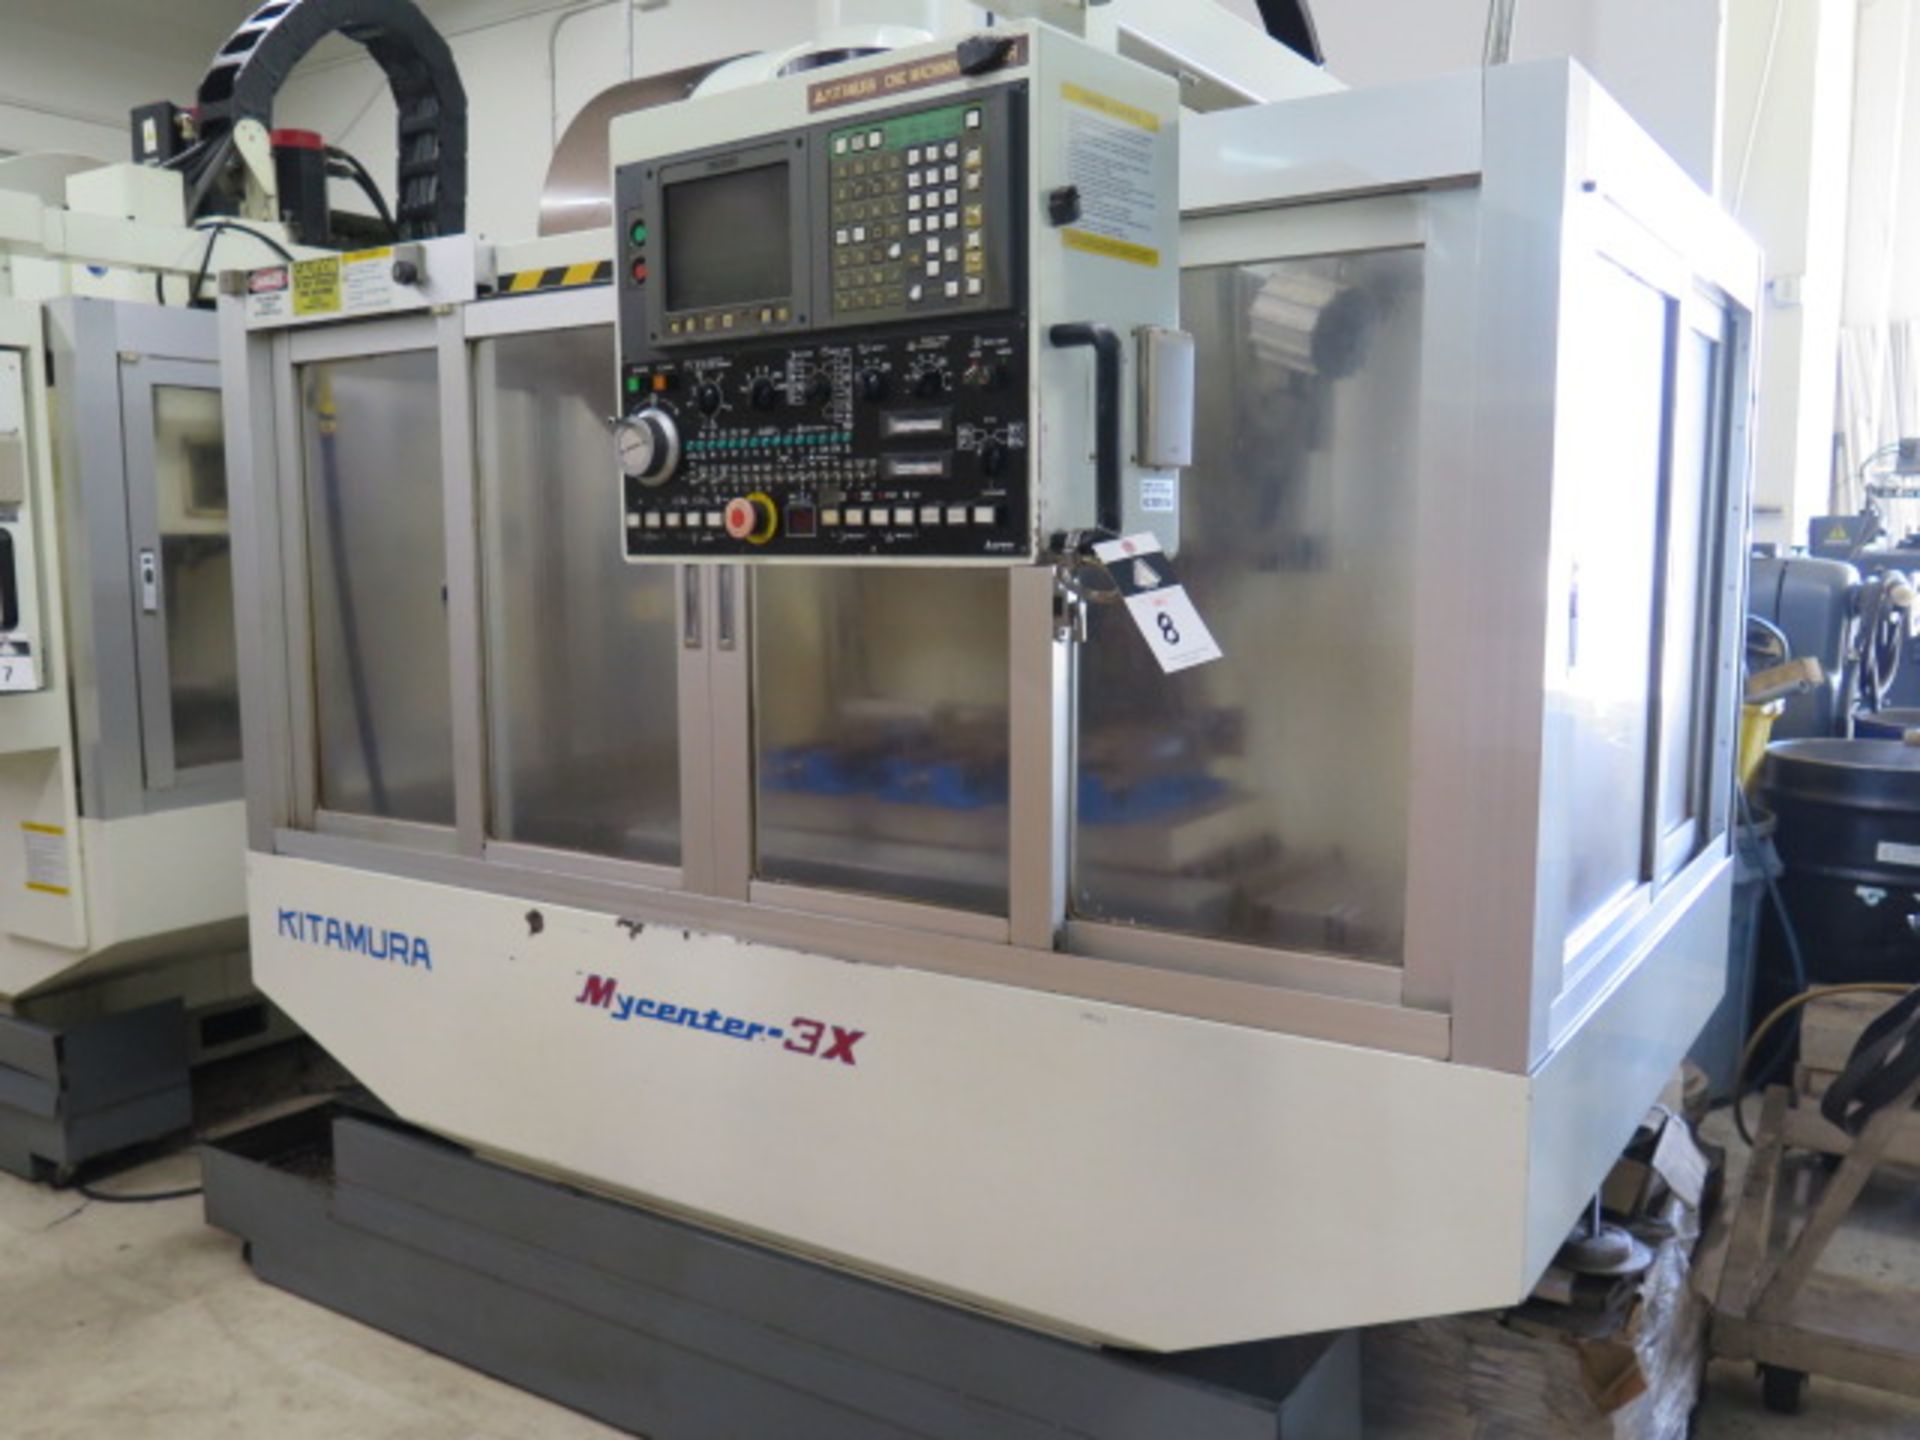 Kitamura Mycenter-3x CNC VMC s/n 11710 w/ Yasnac Controls, 24-Station STC, SOLD AS IS